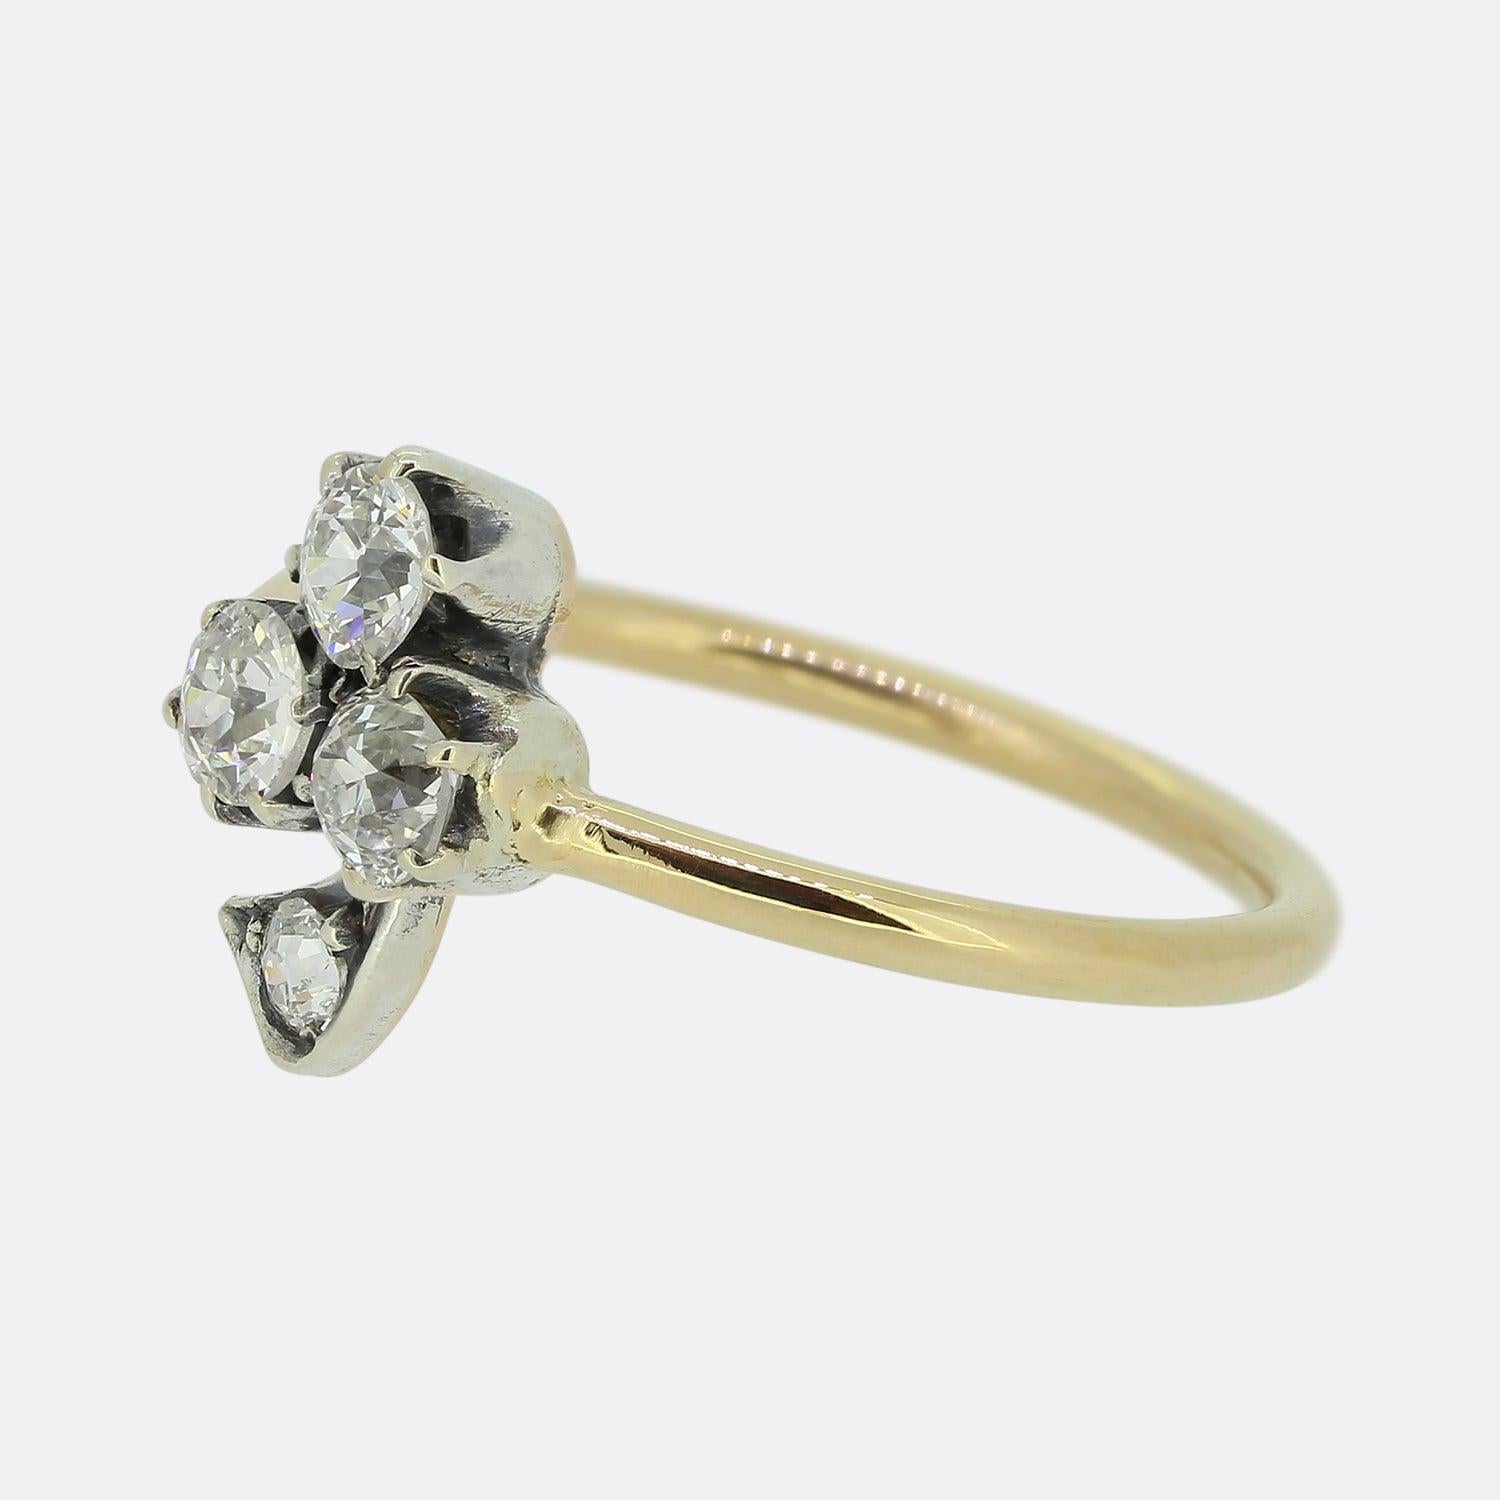 Here we have a charming Victorian clover ring. This piece is platinum set with a trio of round faceted old cut diamonds collectively forming the clover motif.  This delightful piece is then finished with a rose cut diamond stem and yellow gold band.